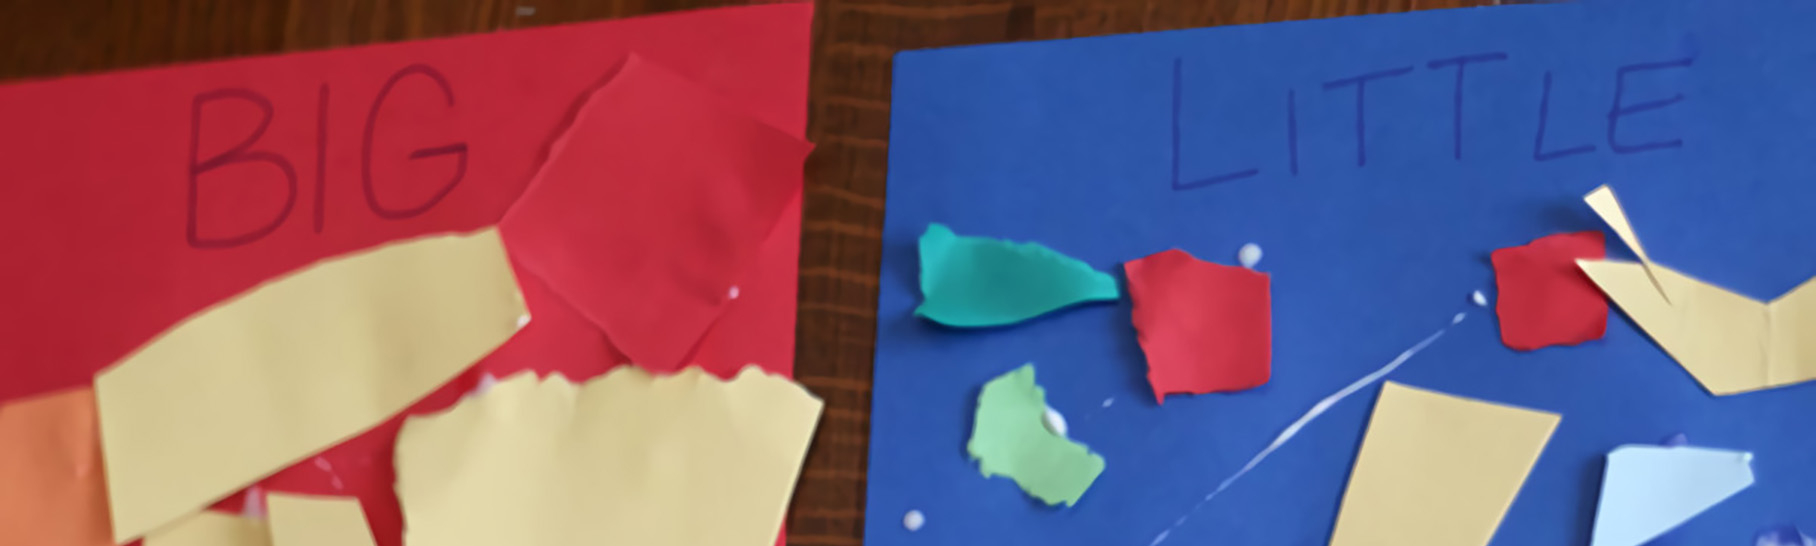 Two pieces of construction paper. One is red and one is blue. At the top of the red paper it says “big.” At the top of the blue paper it says “little.” There are pieces of paper of various sizes on the red and blue paper.